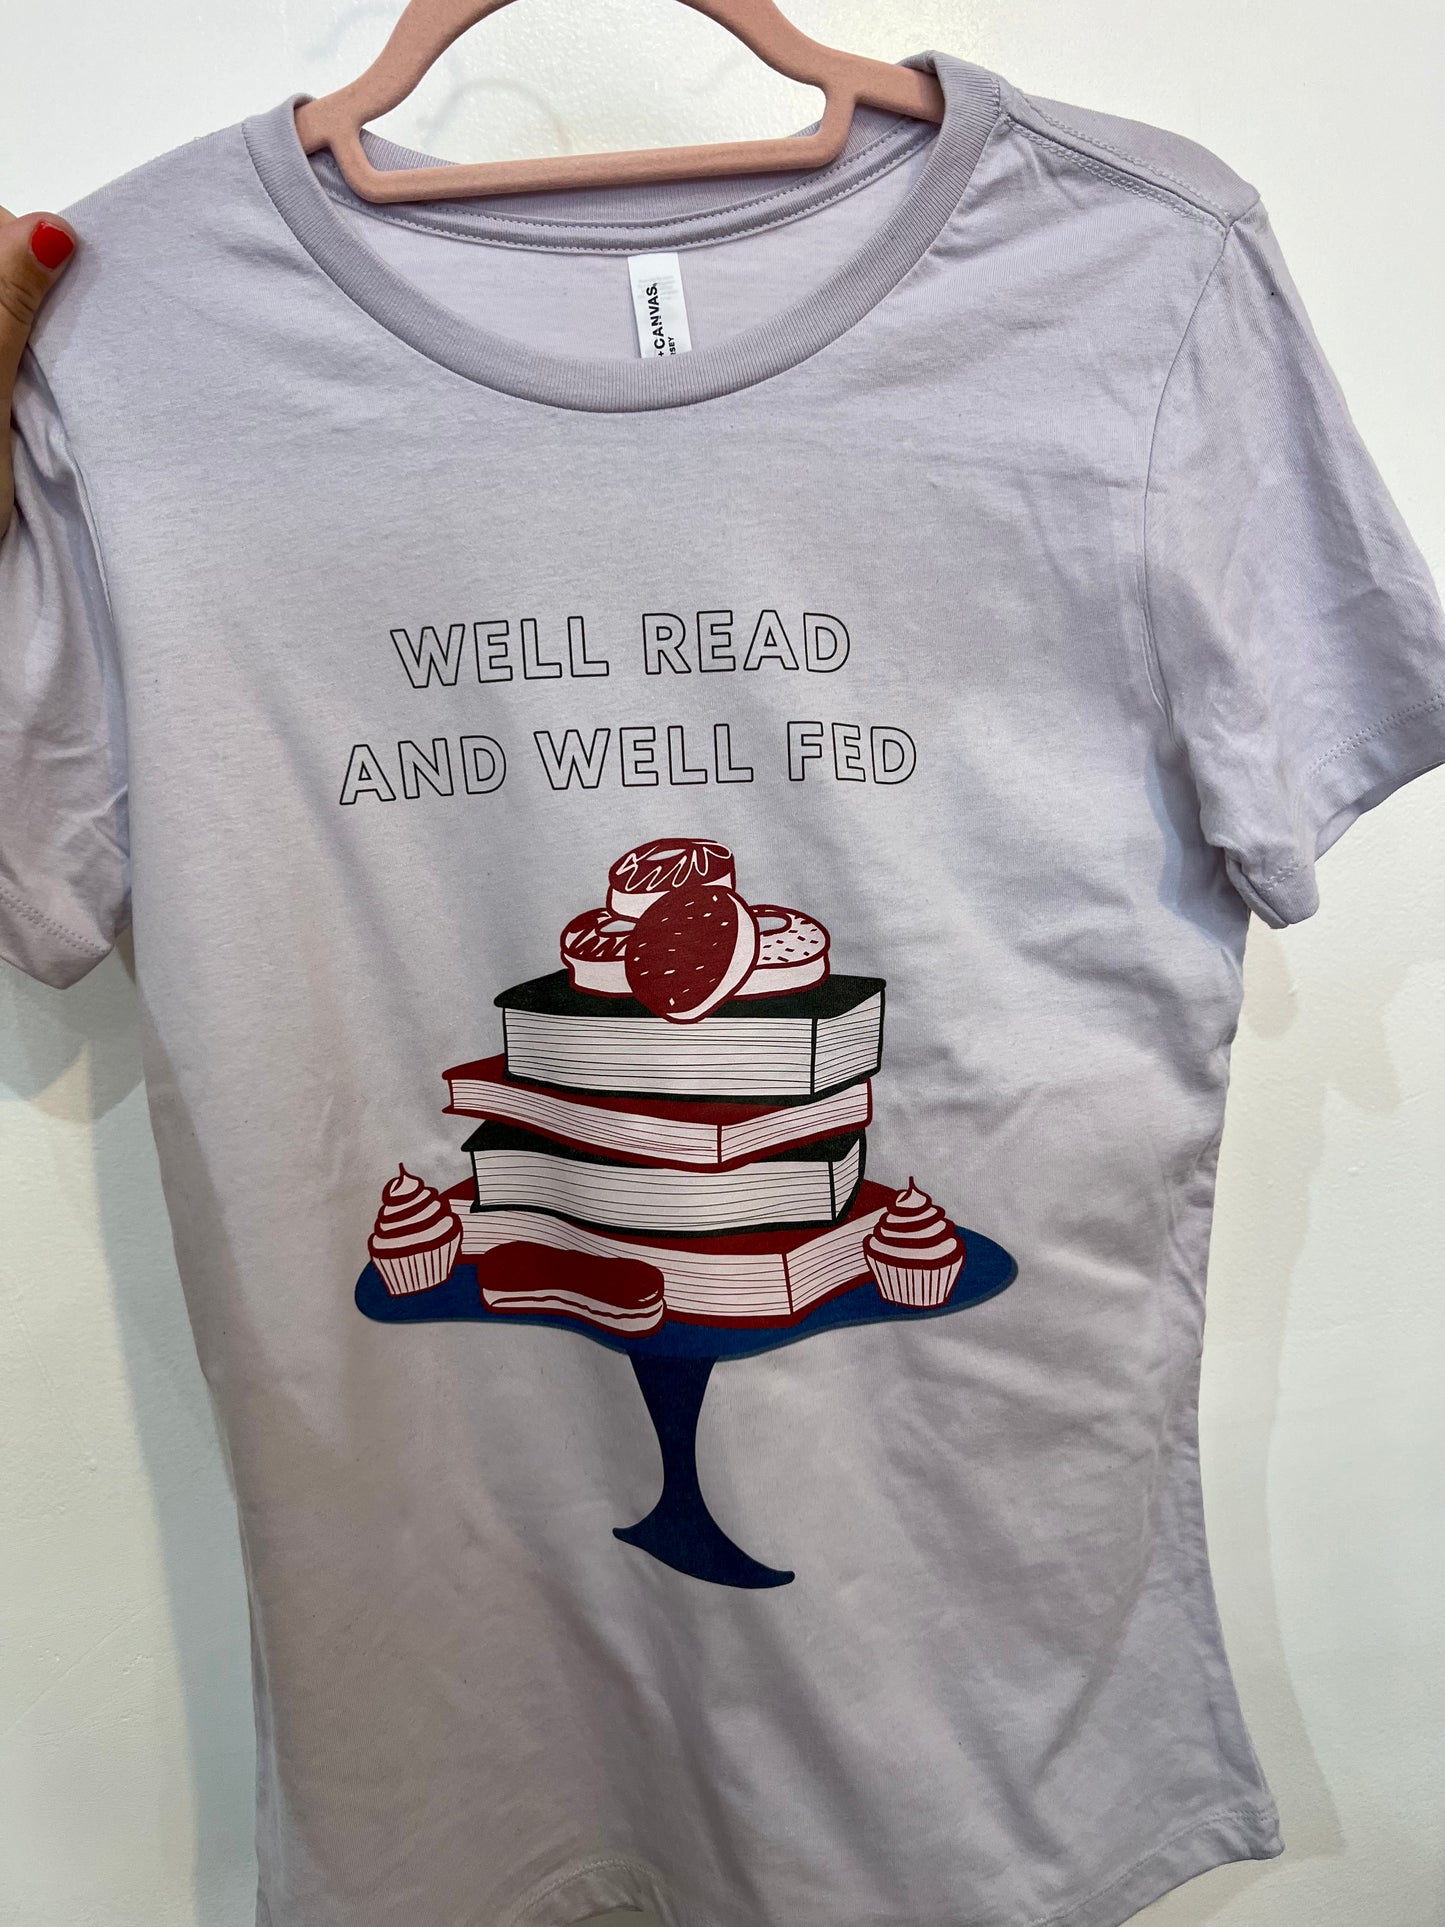 Well Read and Well Fed T-shirt